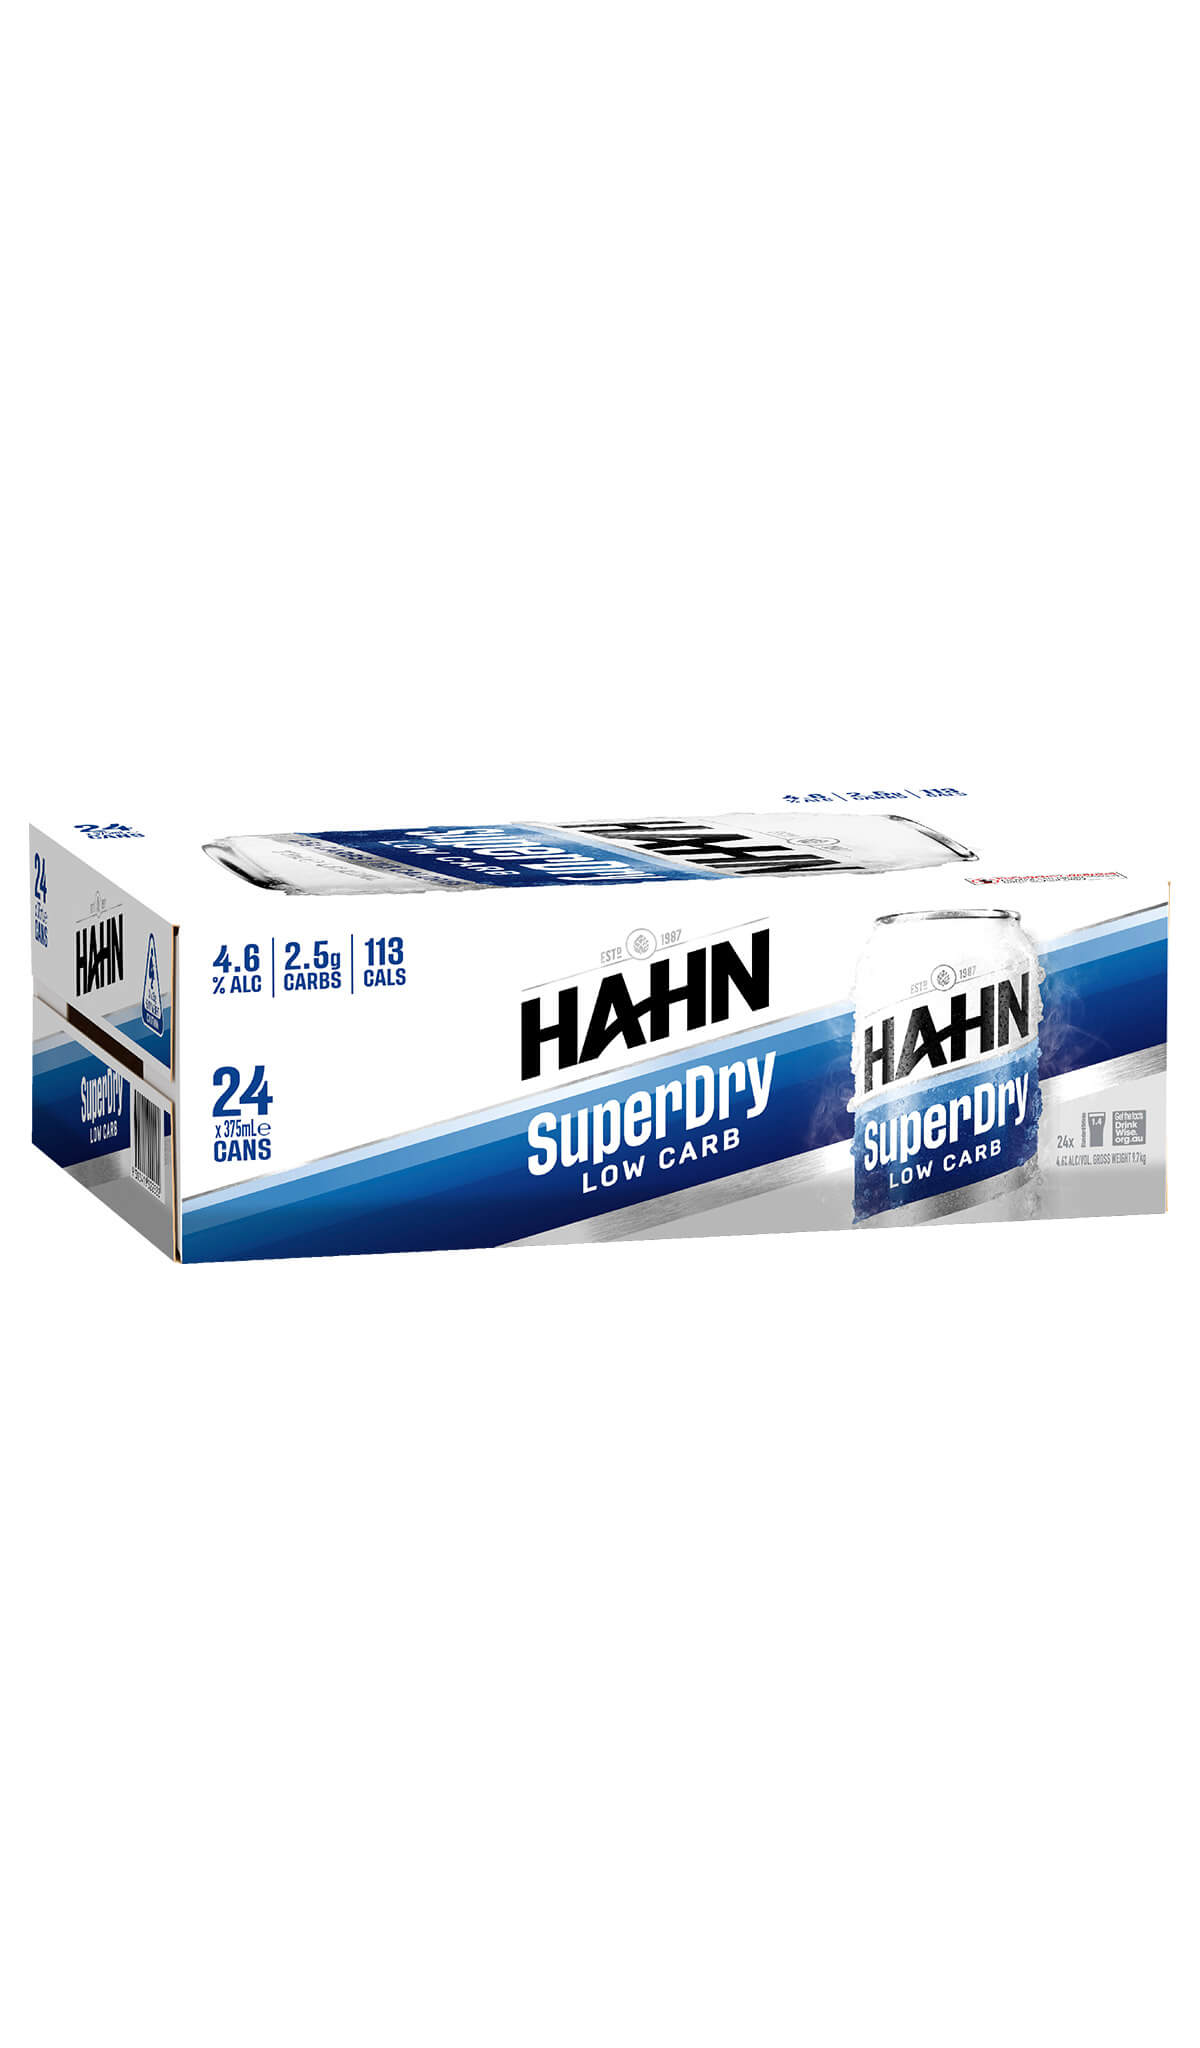 Find out more, explore the range and buy Hahn SuperDry 24 x 375mL Bottle Slab available online at Wine Sellers Direct - Australia's independent liquor specialists.